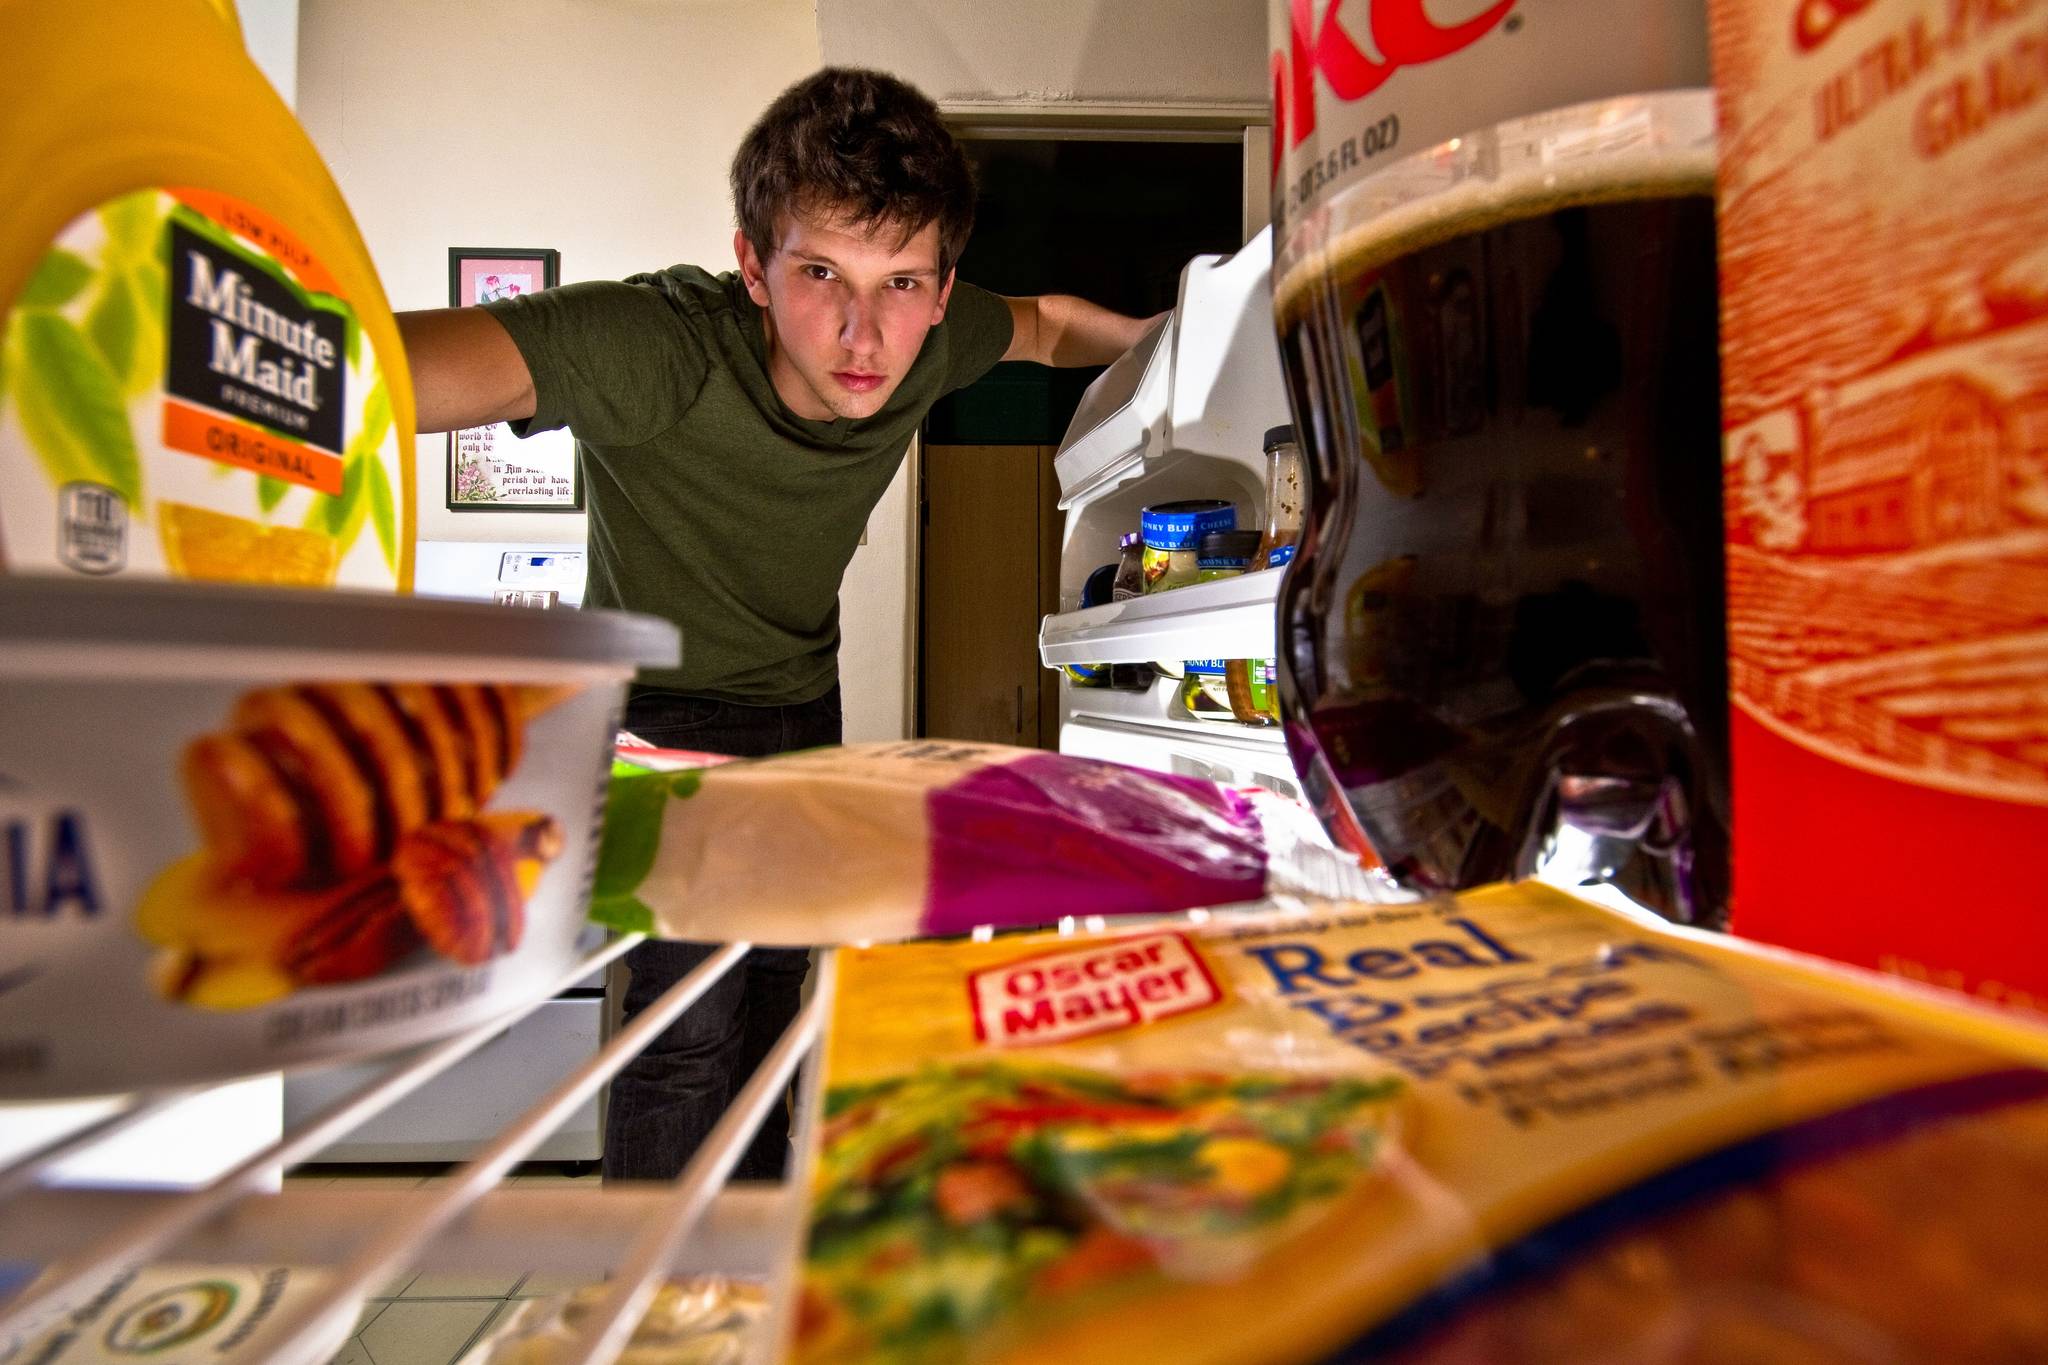 Diet drinkers ‘compensate’ with junk food